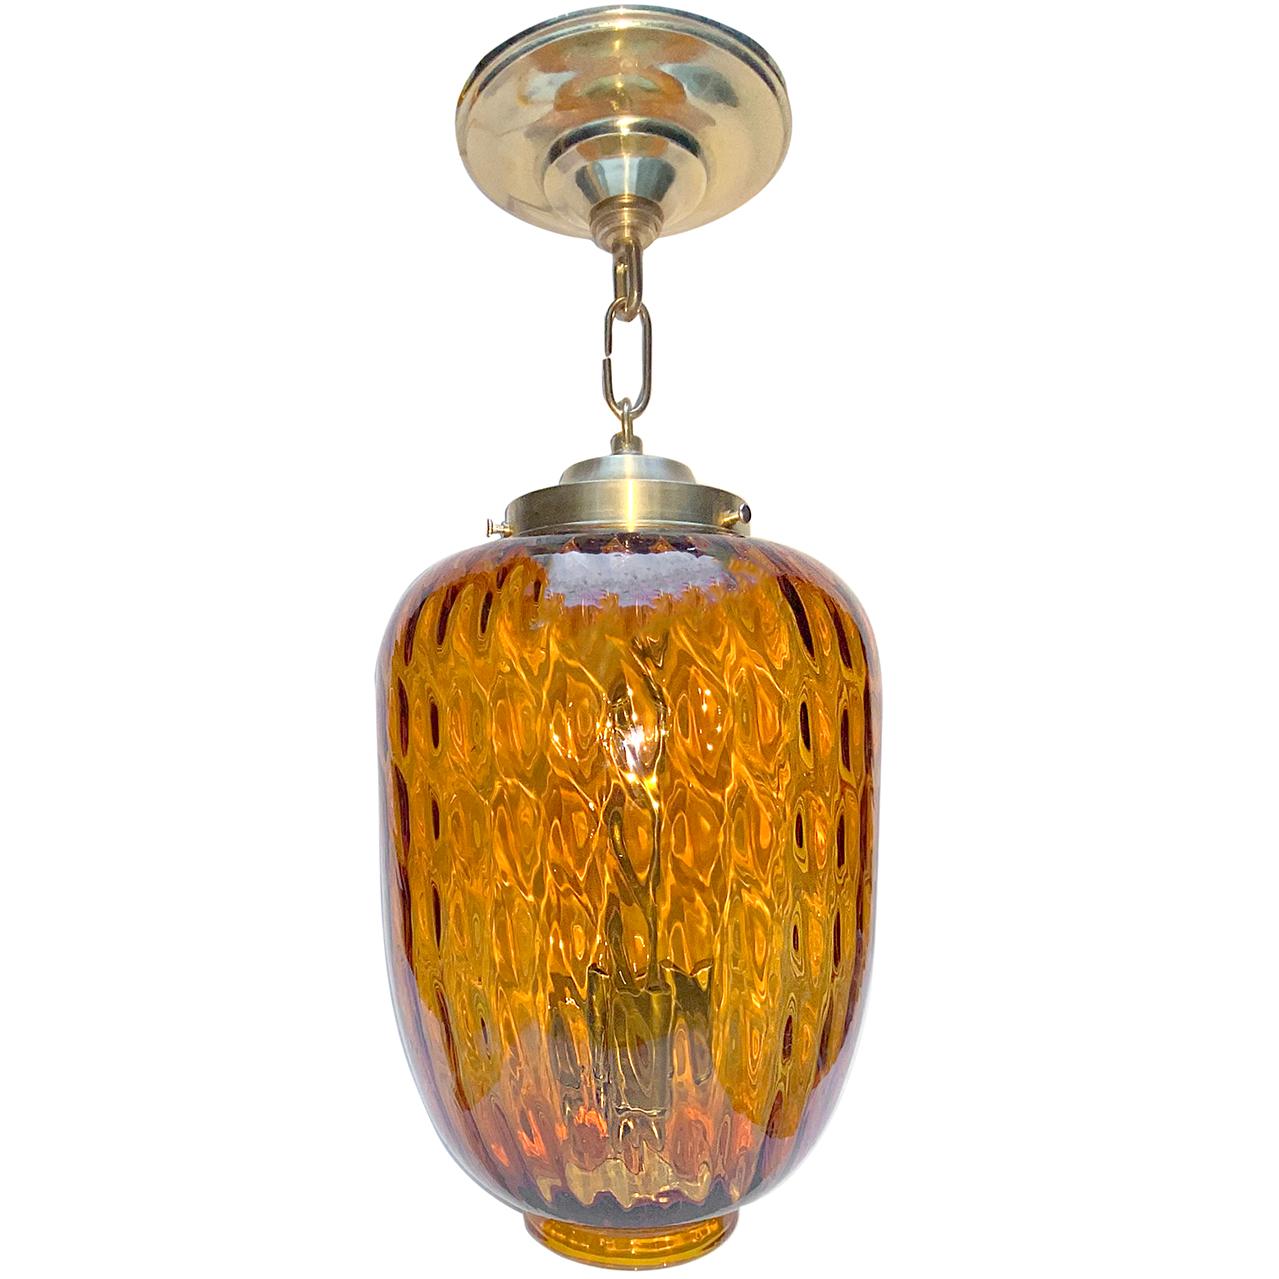 A pair of circa 1950's Italian blown glass lanterns with interior lights. Sold Individually

Measurements:
Diameter: 8